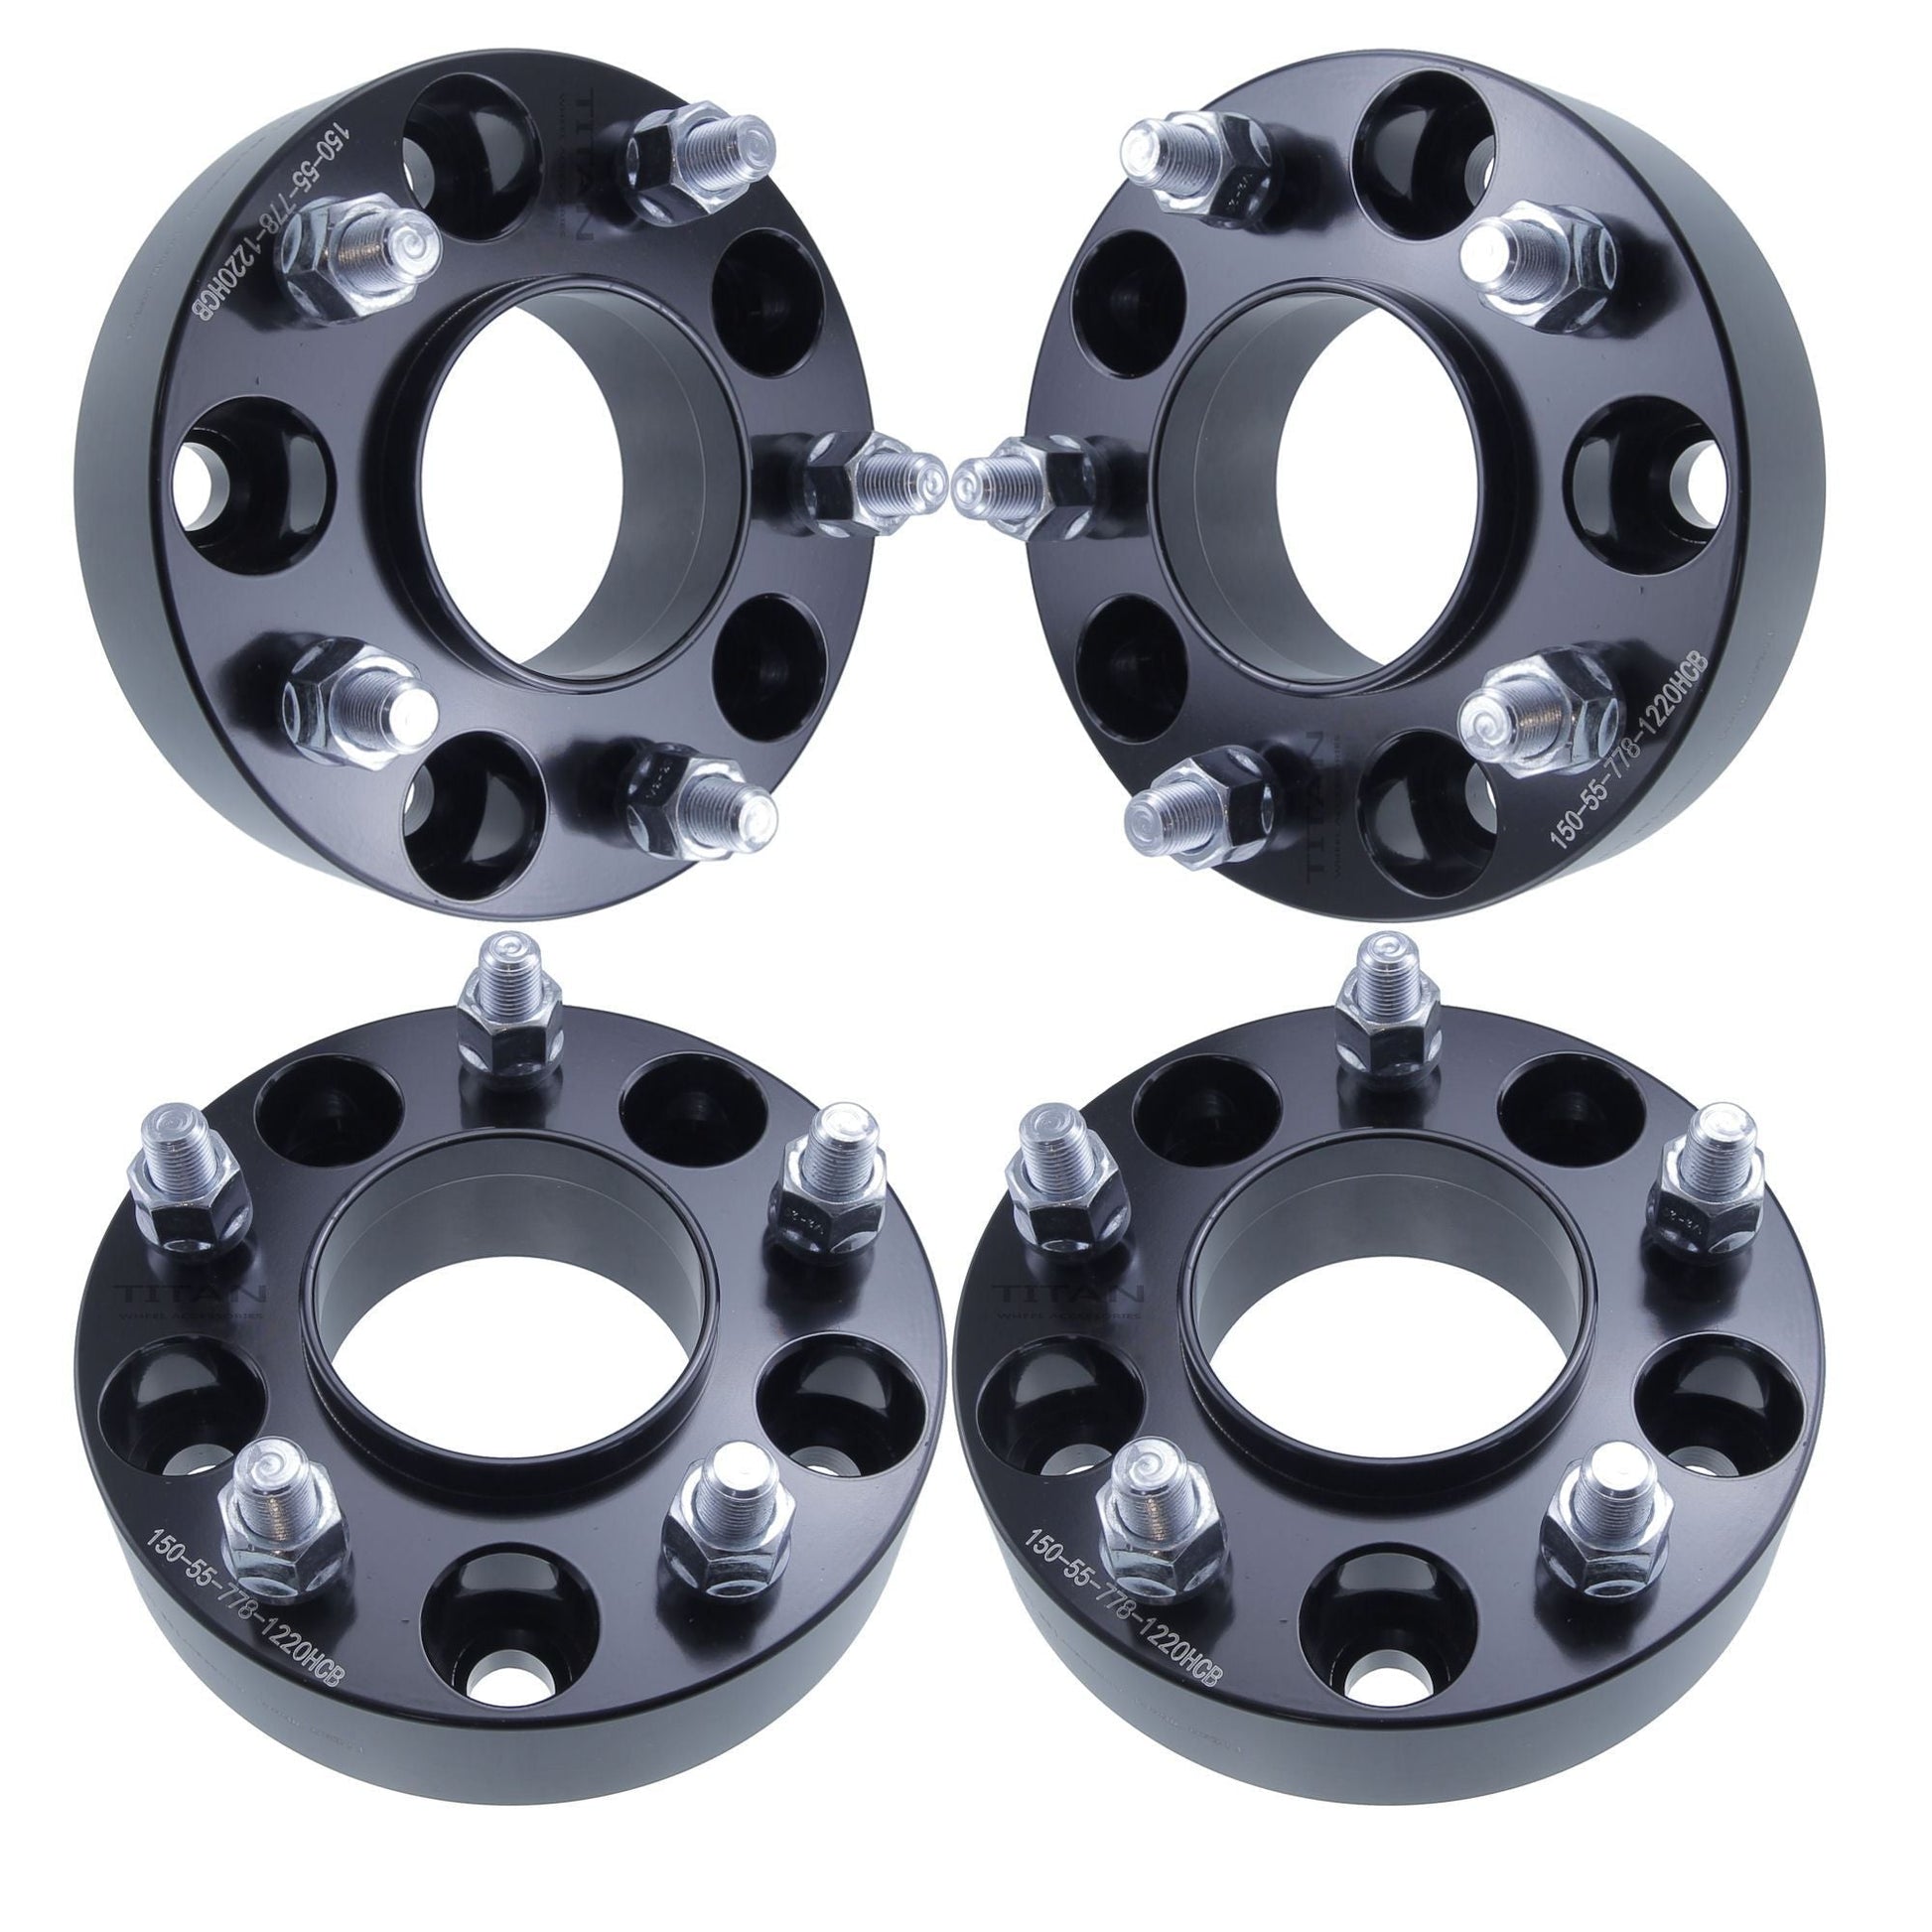 38mm (1.5") Titan Wheel Spacers for Chevy Astro 1500 C10 | 5x5 | 77.8 Hubcentric |1/2x20 Studs | Set of 4 | Titan Wheel Accessories